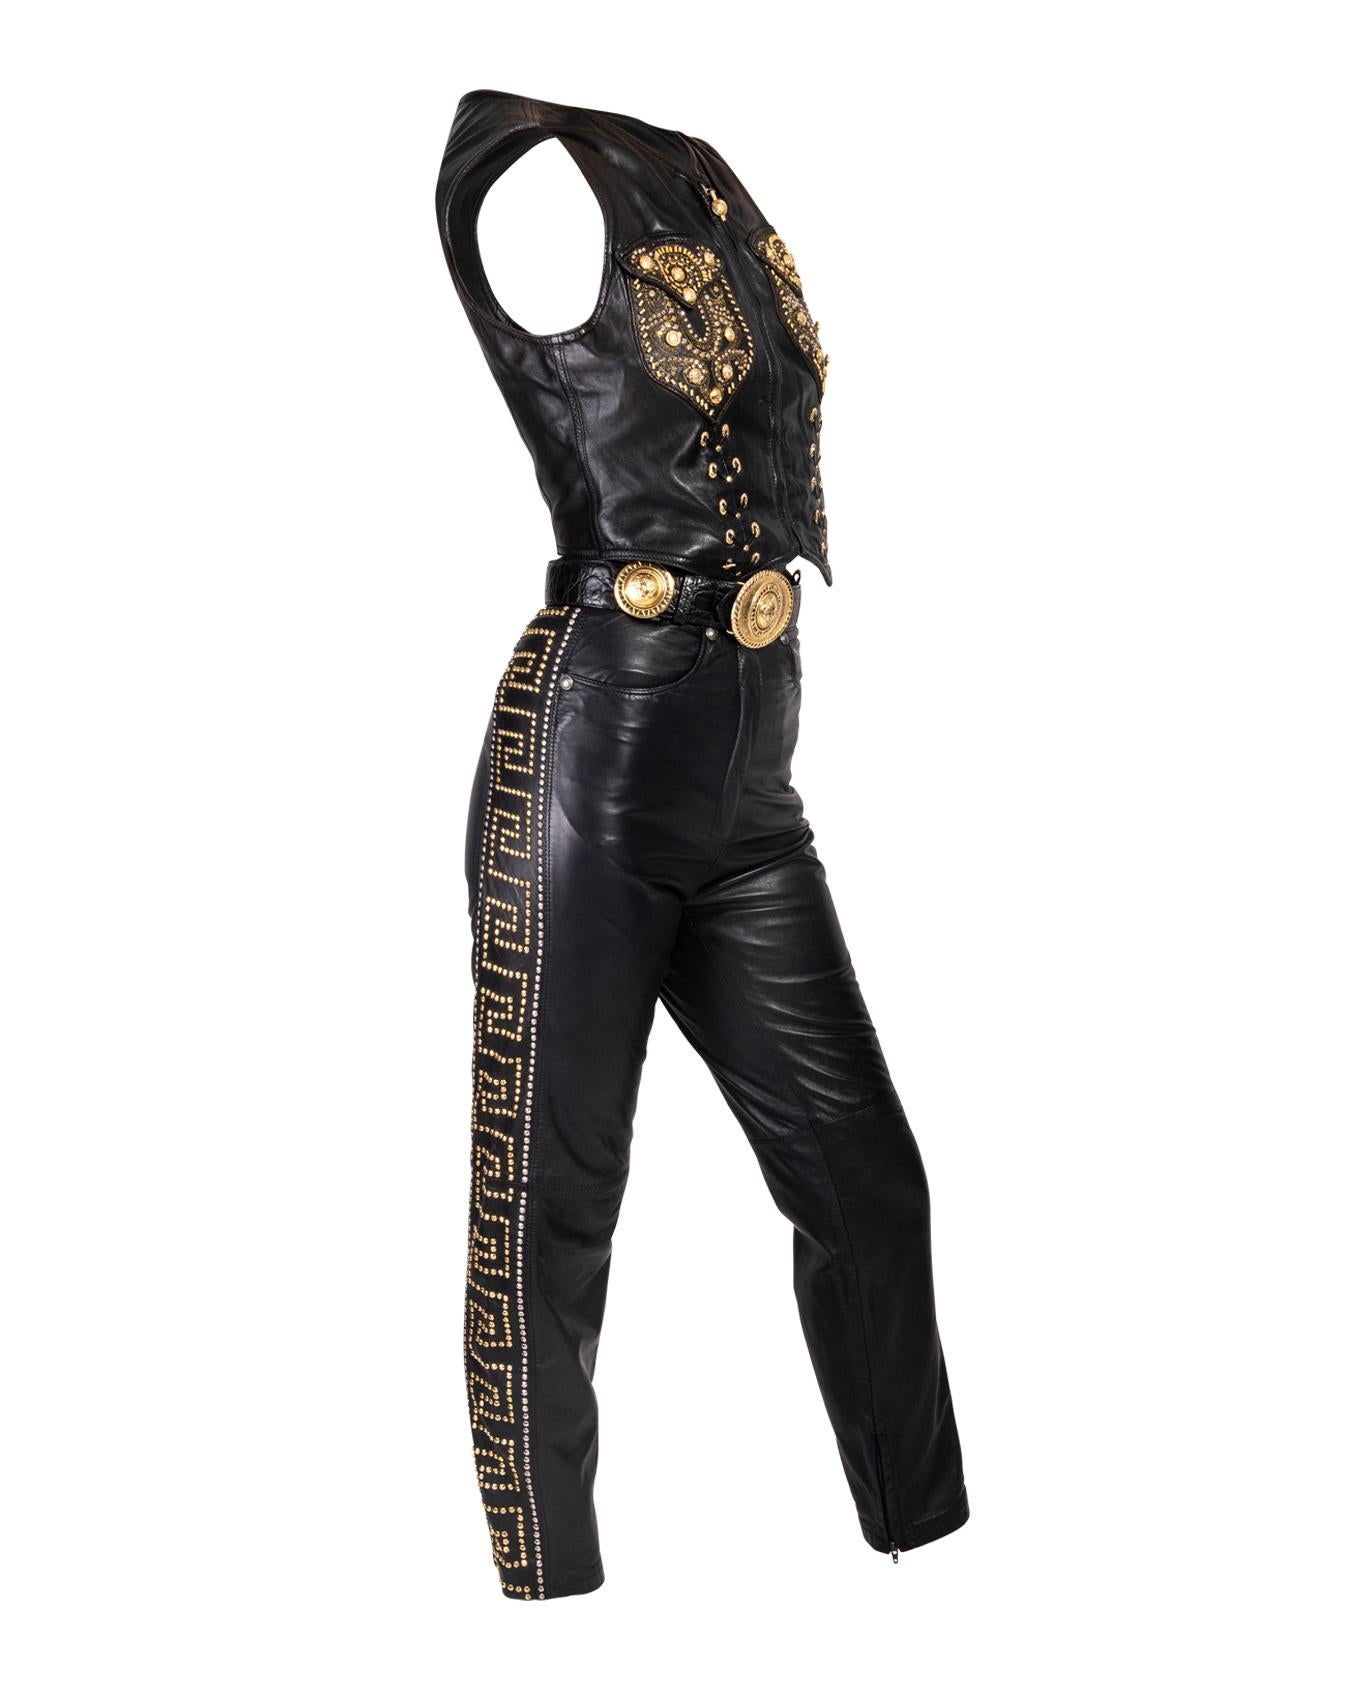 Women's A/W 1992 Gianni Versace Leather Vest, Pant and Belt Set with Gold Stud Details